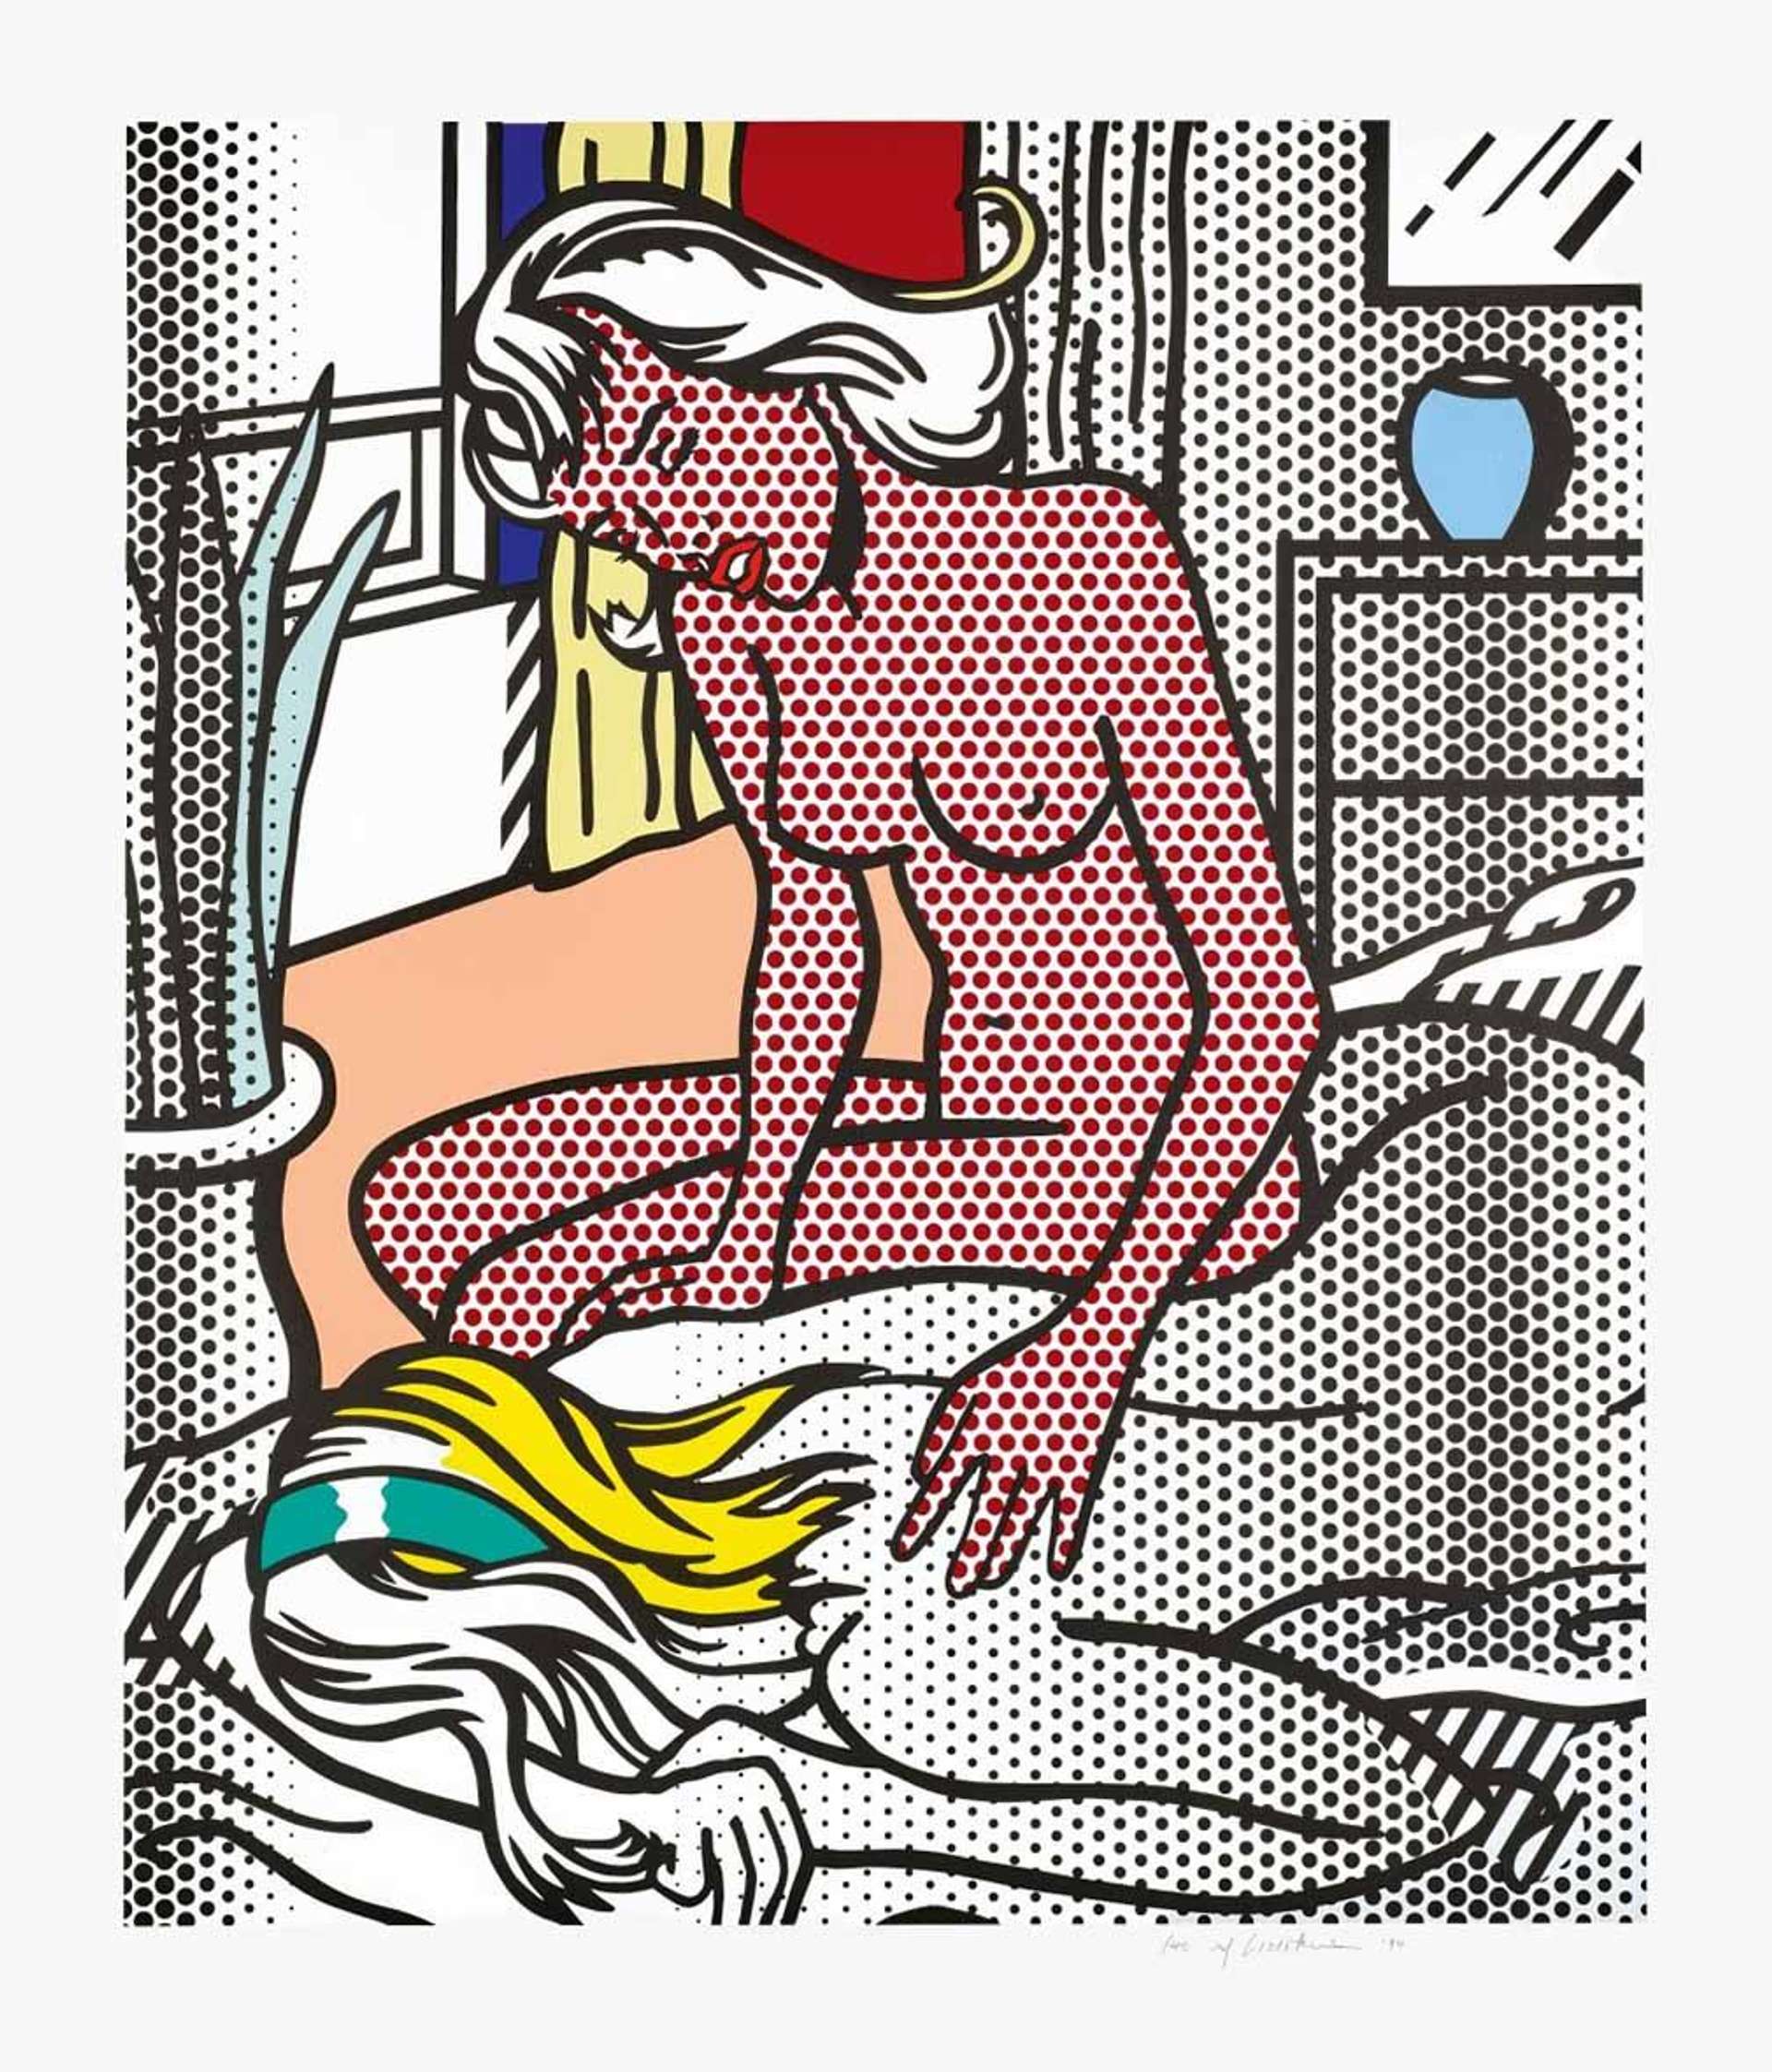 A screenprint by Roy Lichtenstein depicting two female nude figures, one reclining face-down in the foreground with the other sitting over her and appearing to console her.